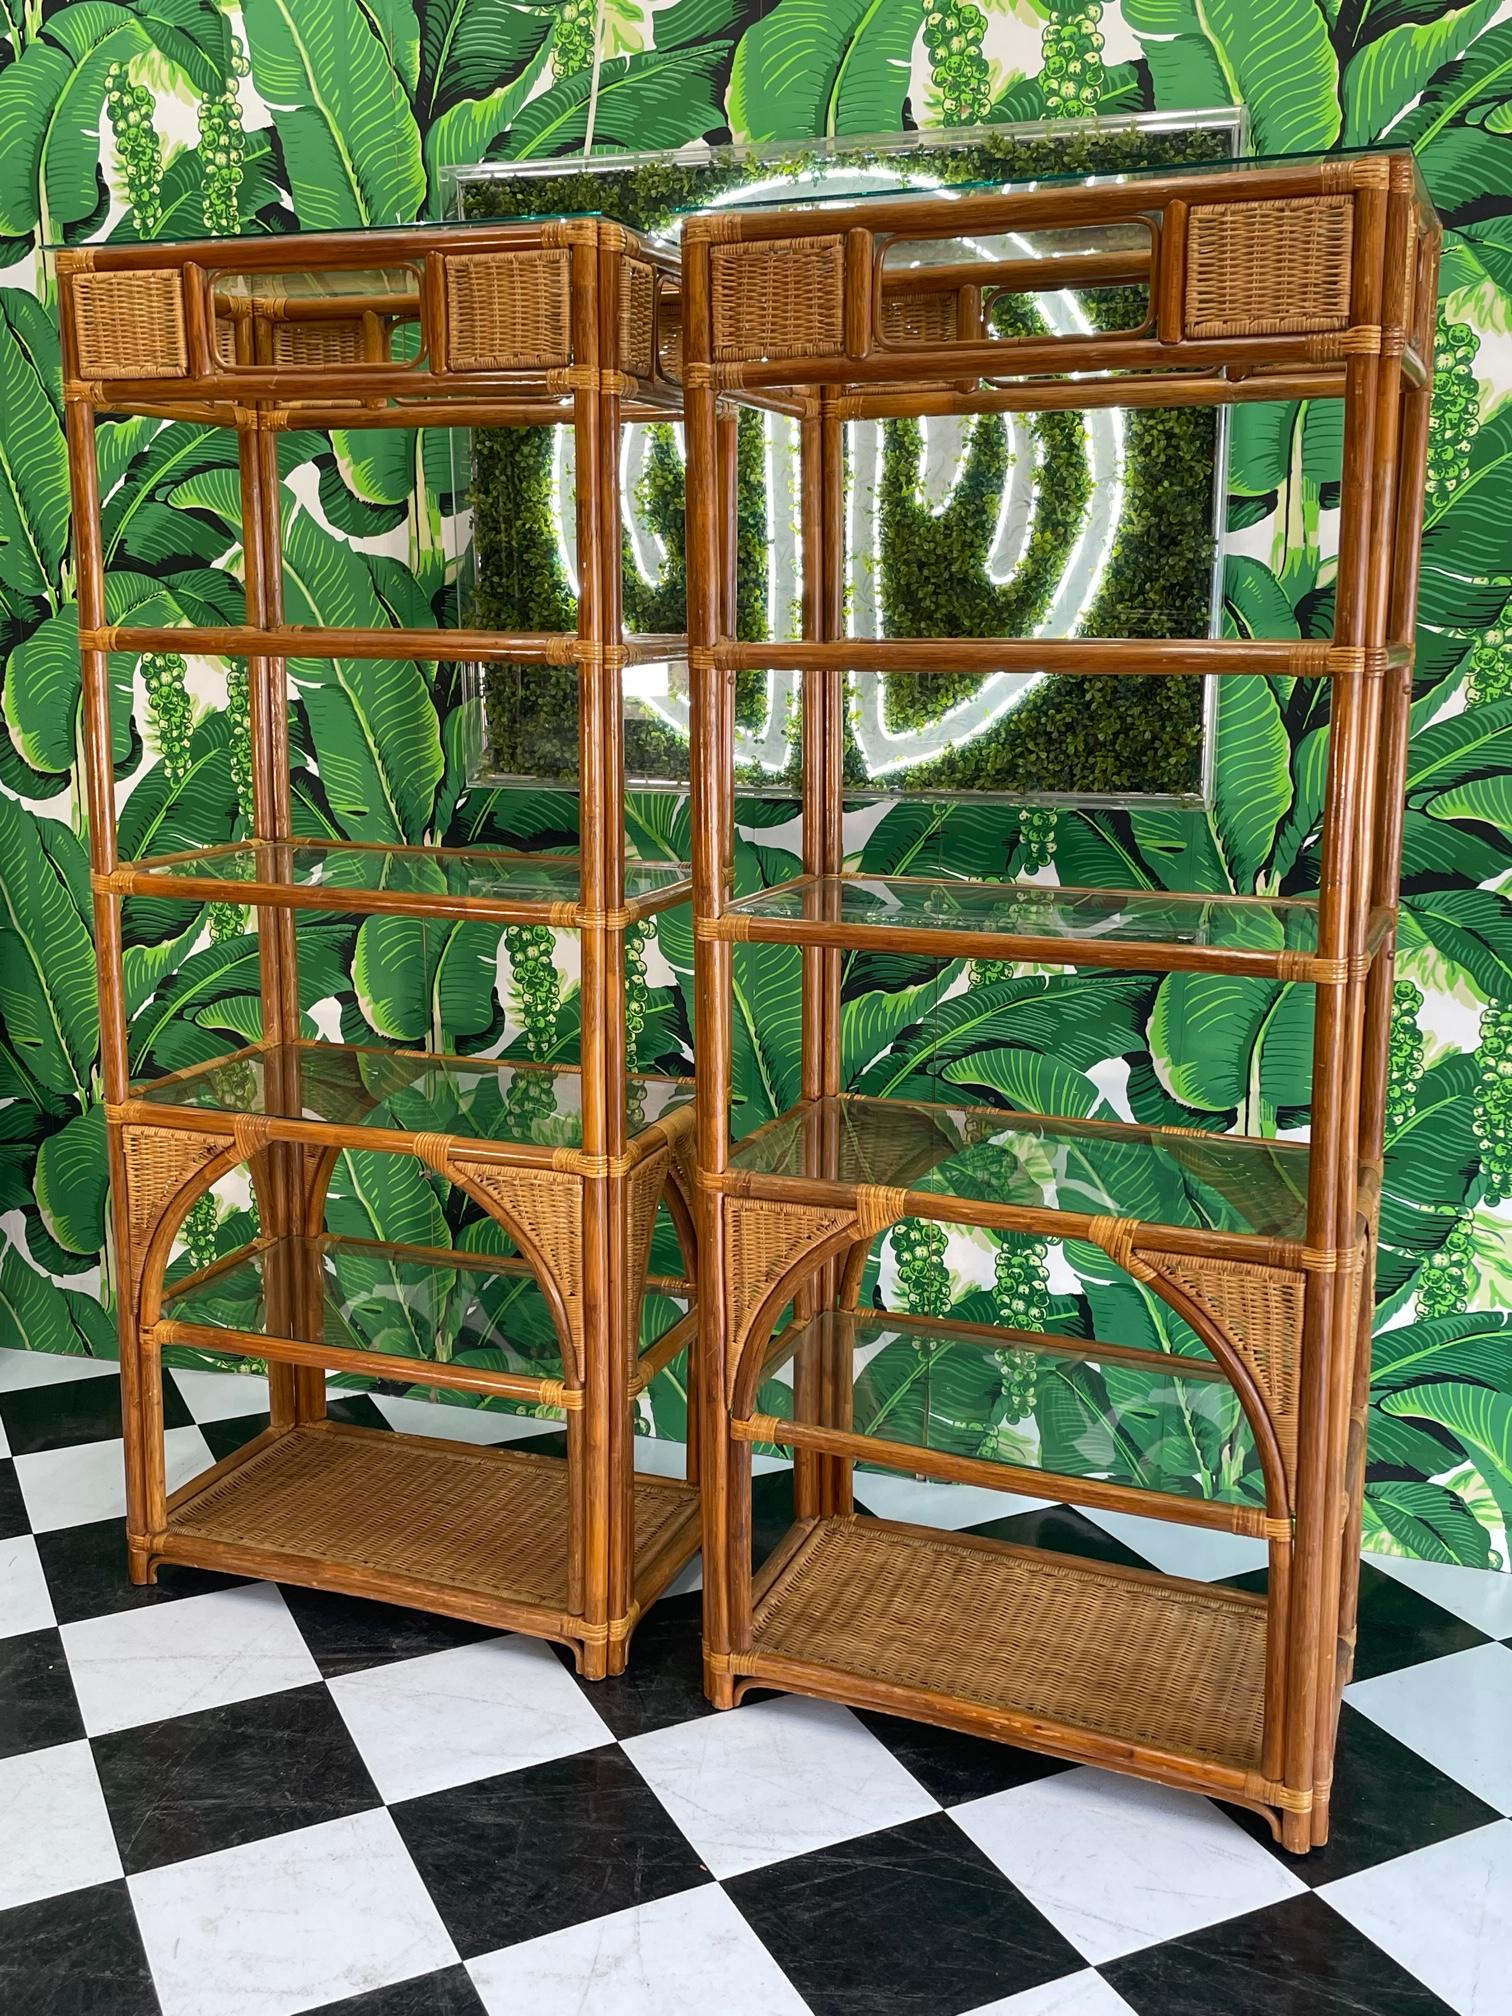 Pair of vintage etageres feature full rattan construction and wicker detailing with glass shelving. Good condition with minor imperfections consistent with age, see photos for condition details.
For a shipping quote to your exact zip code, please